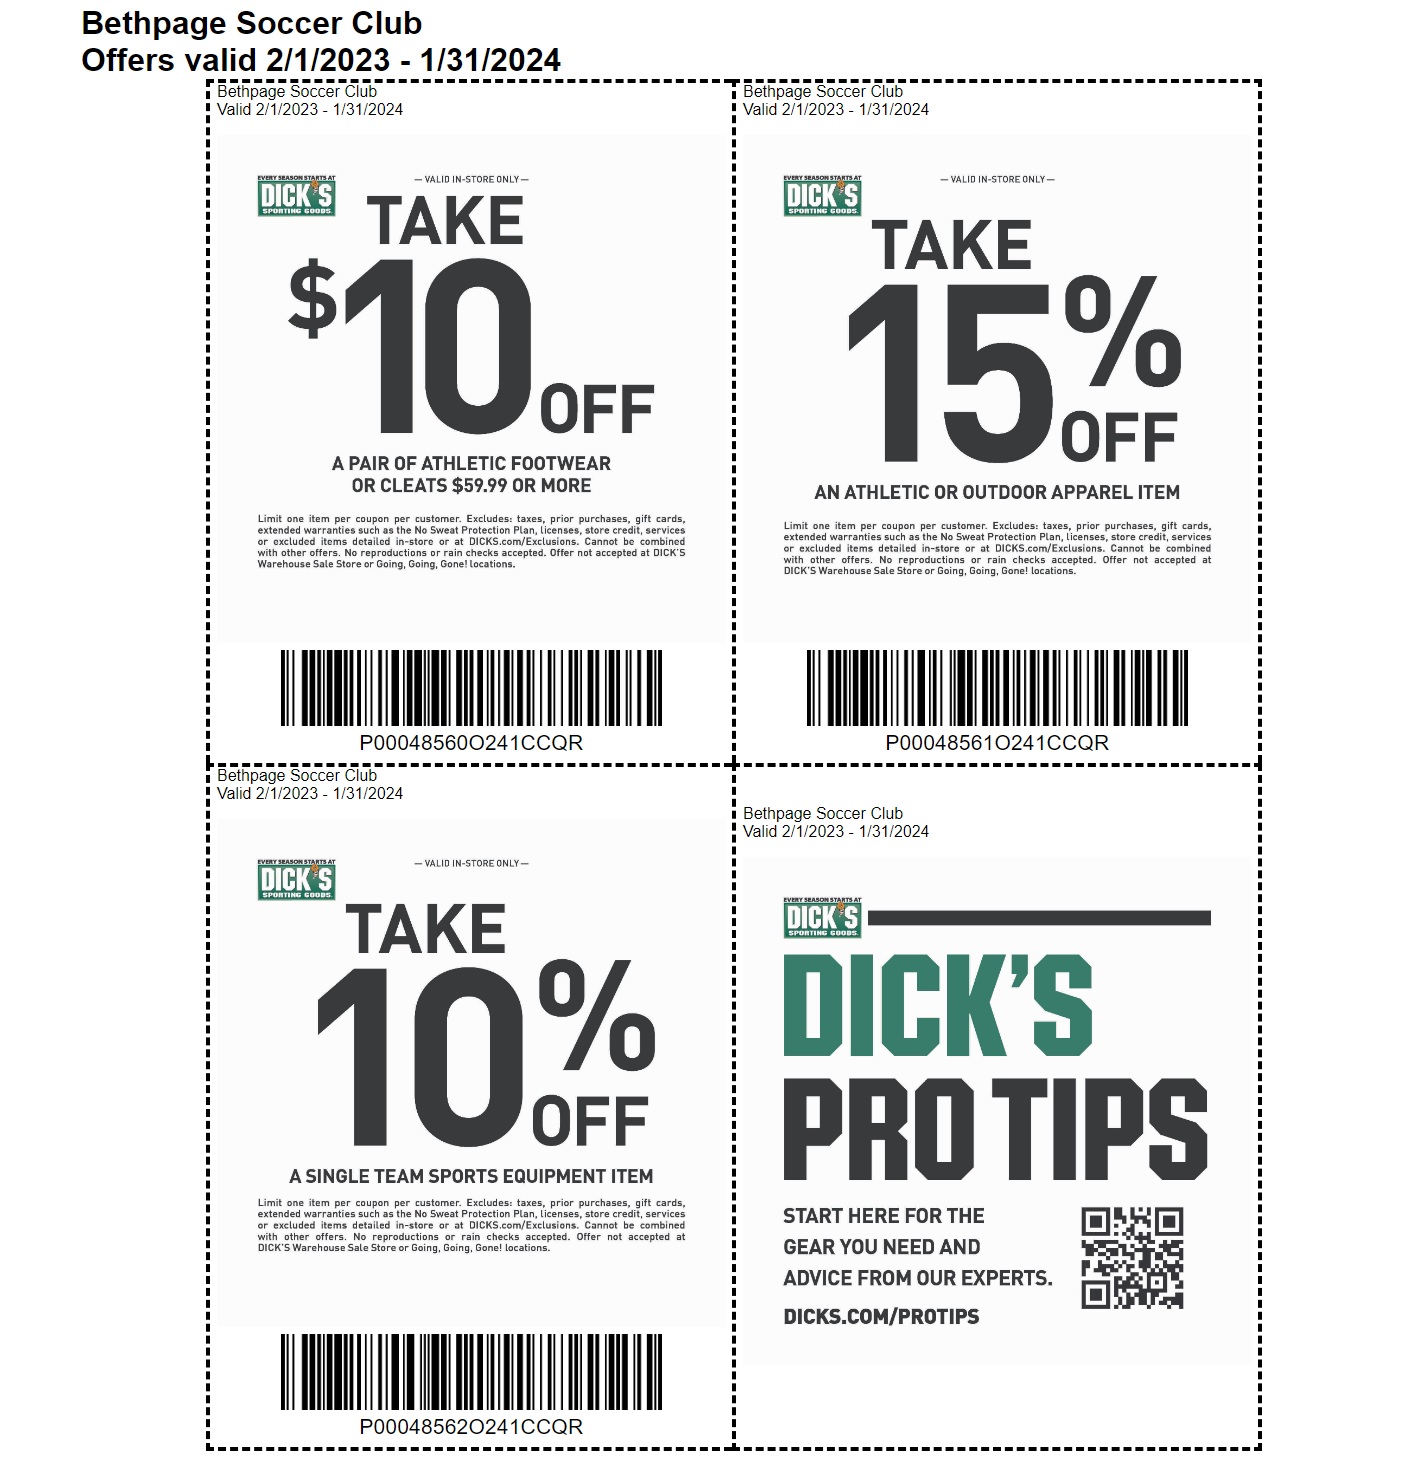 Dicks Coupon Feb 2023 to Jan 2024 Bethpage Soccer